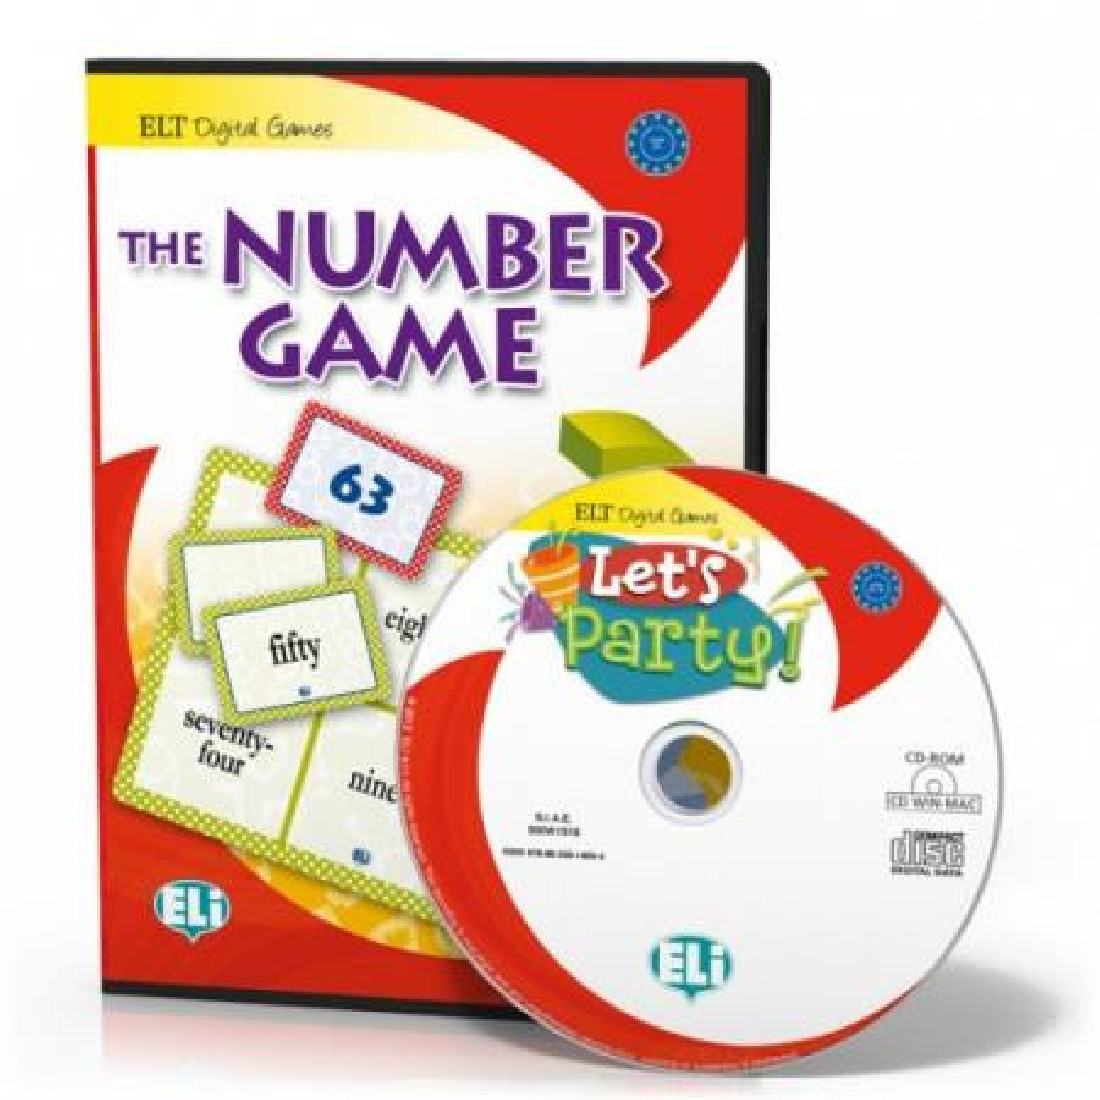 THE NUMBER GAME - DIGITAL EDITION